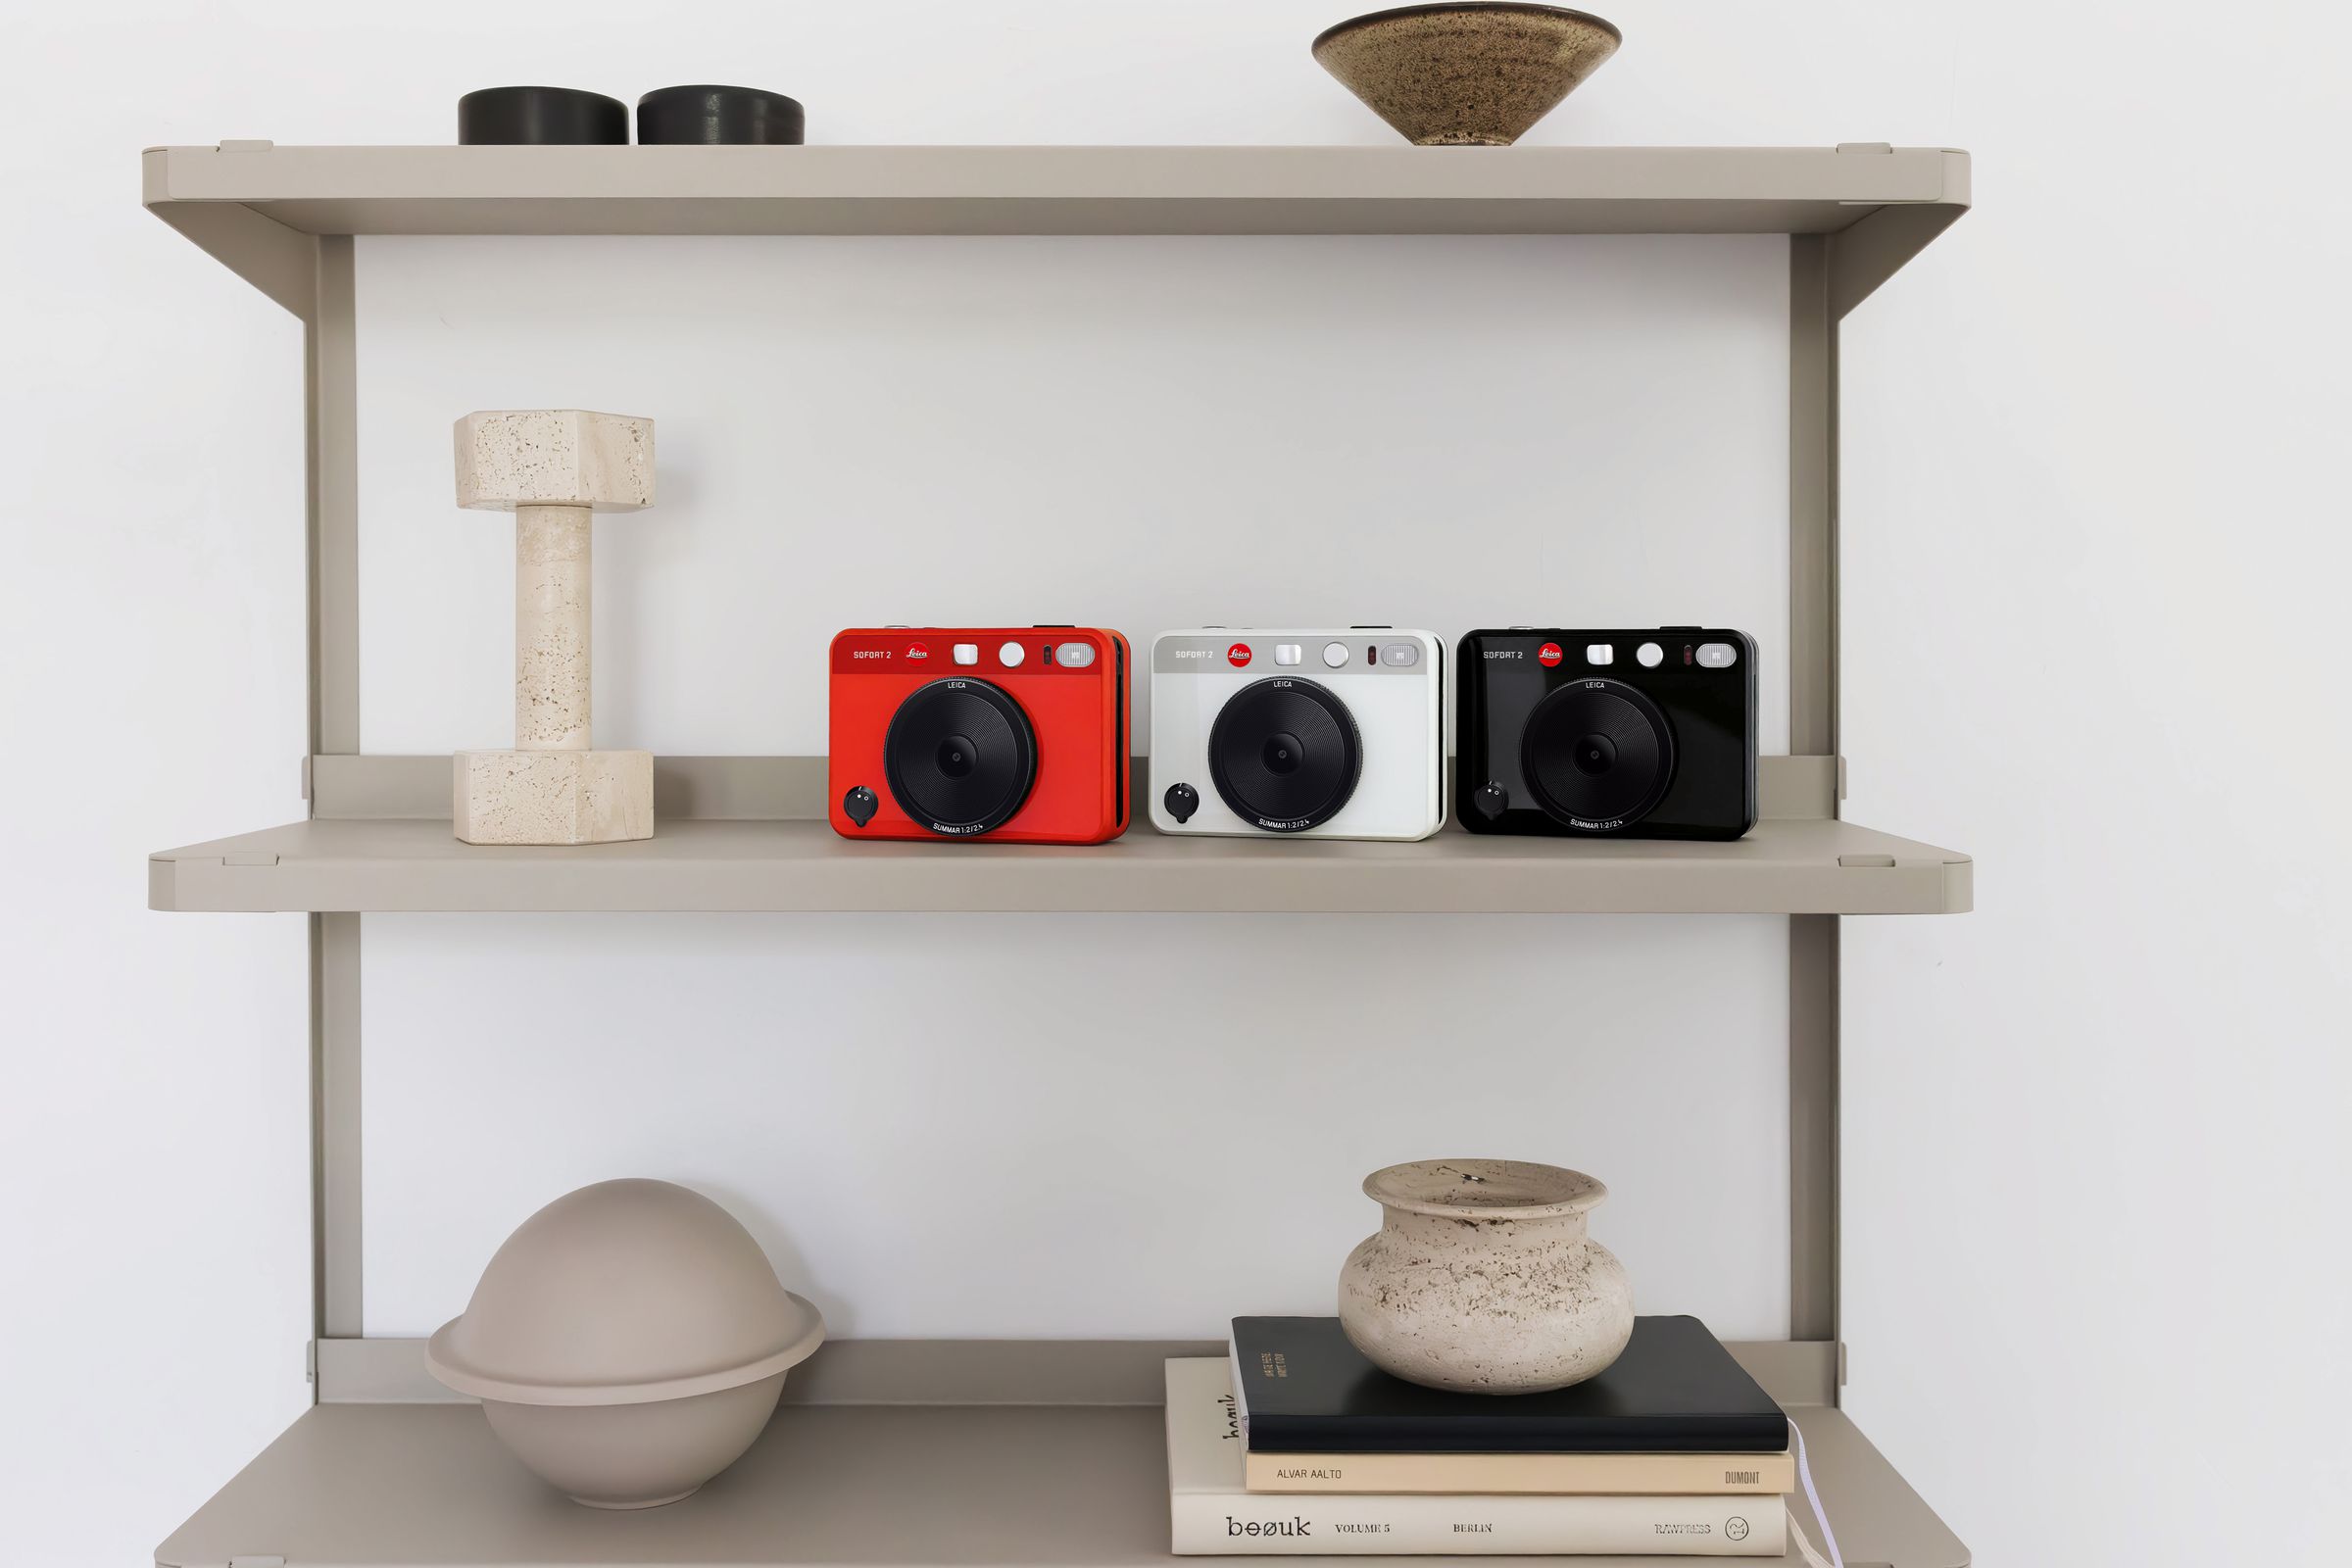 Red, black, and white versions of Leica Sofort 2 sitting on a shelf.